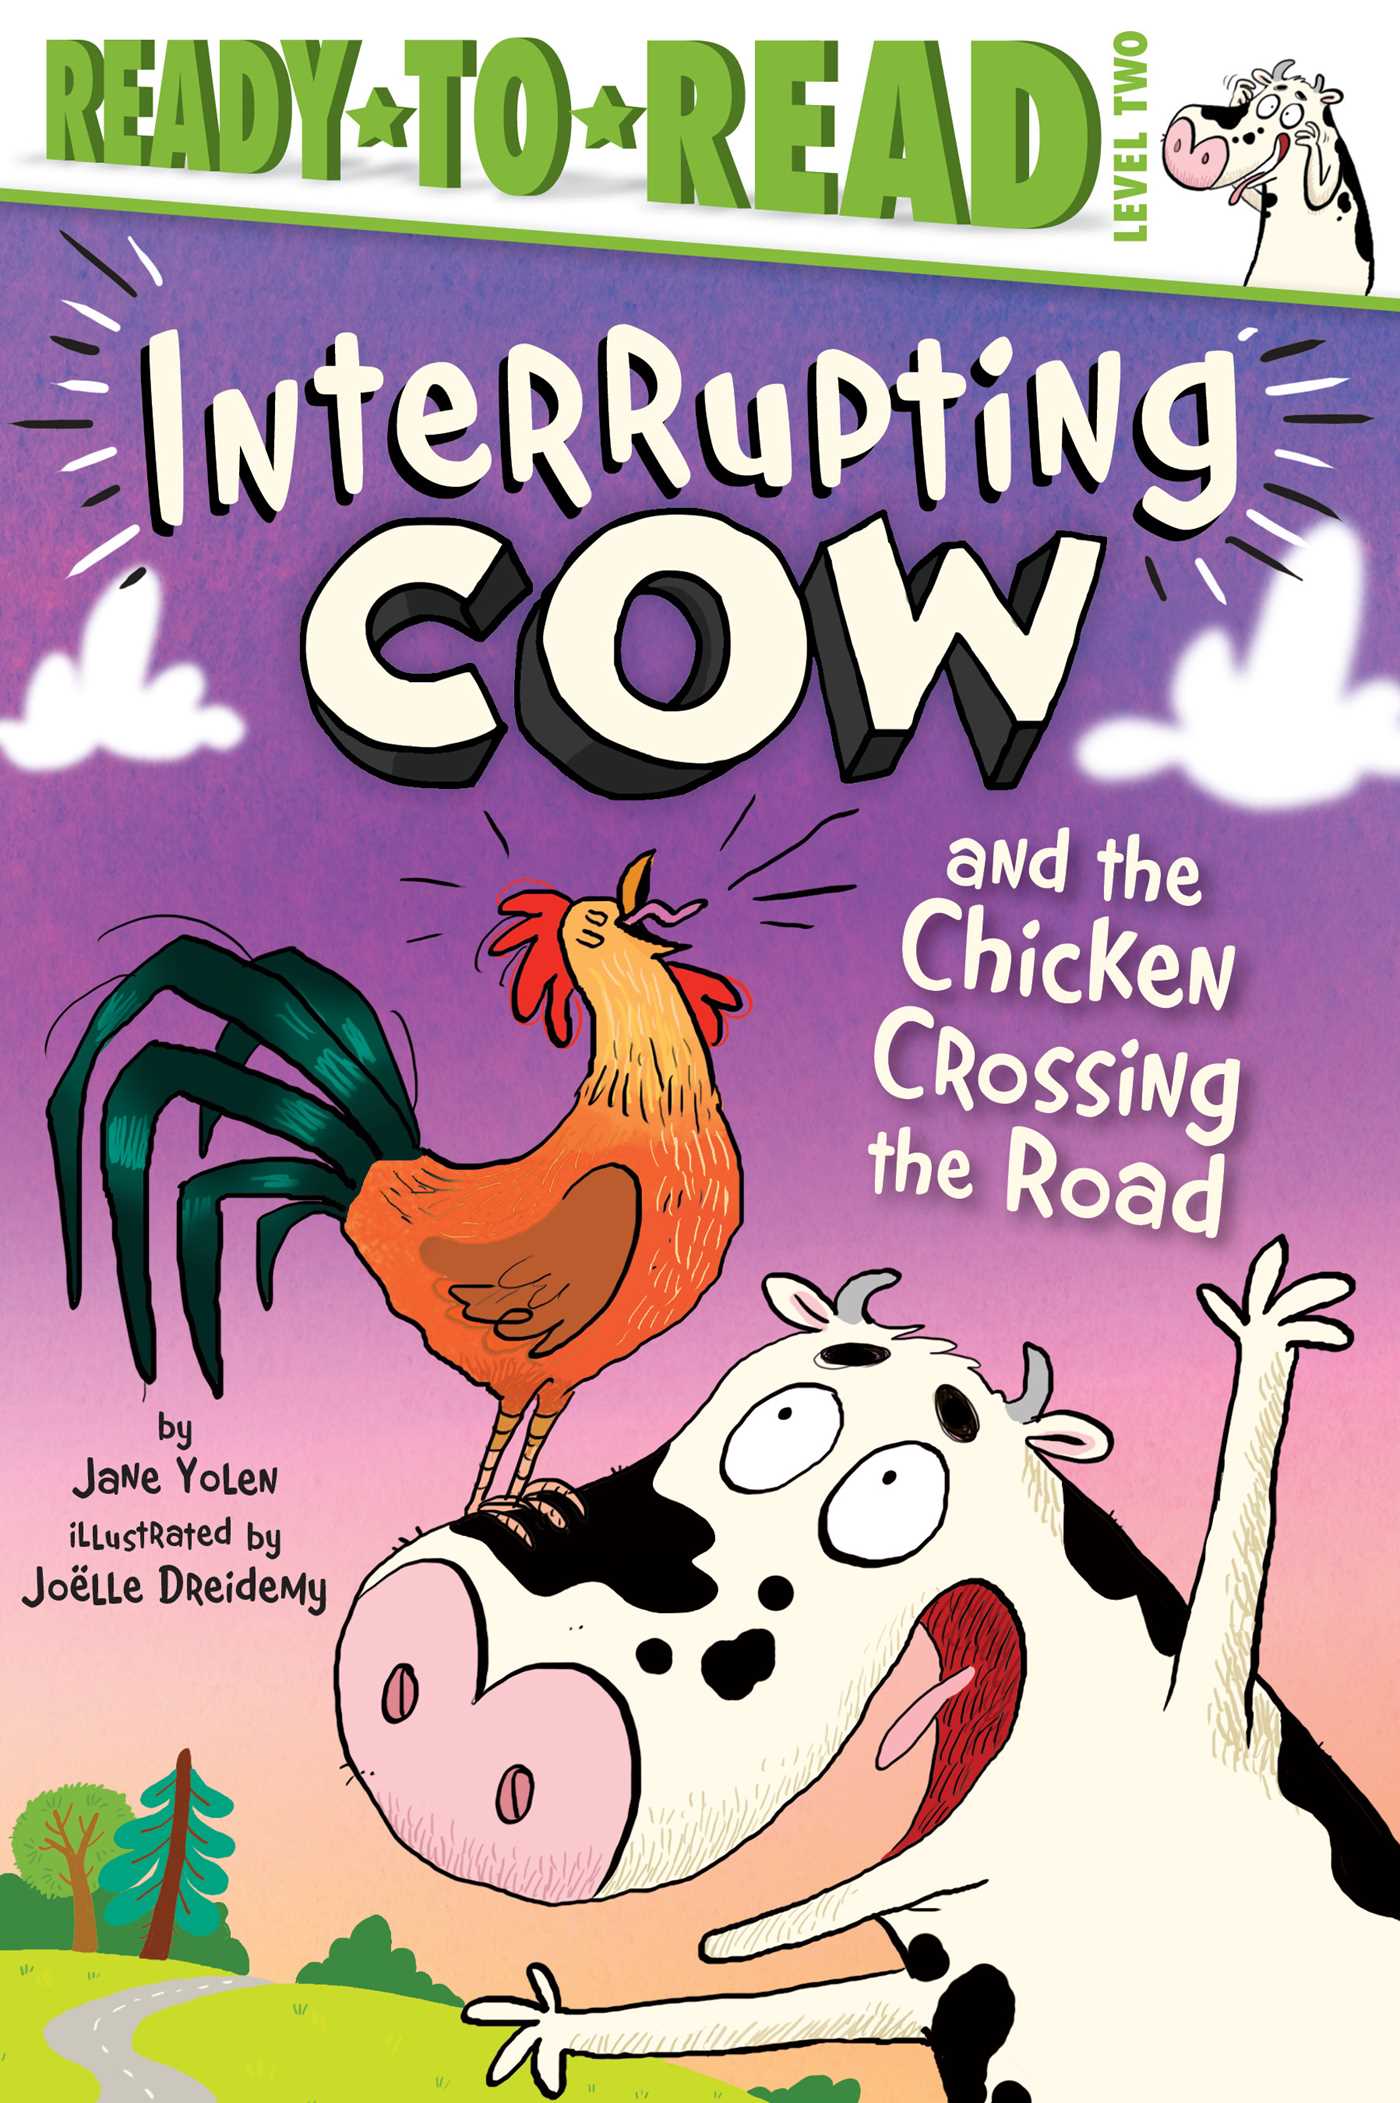 Ready-to-Read - Interrupting Cow and the Chicken Crossing the Road  | First reader